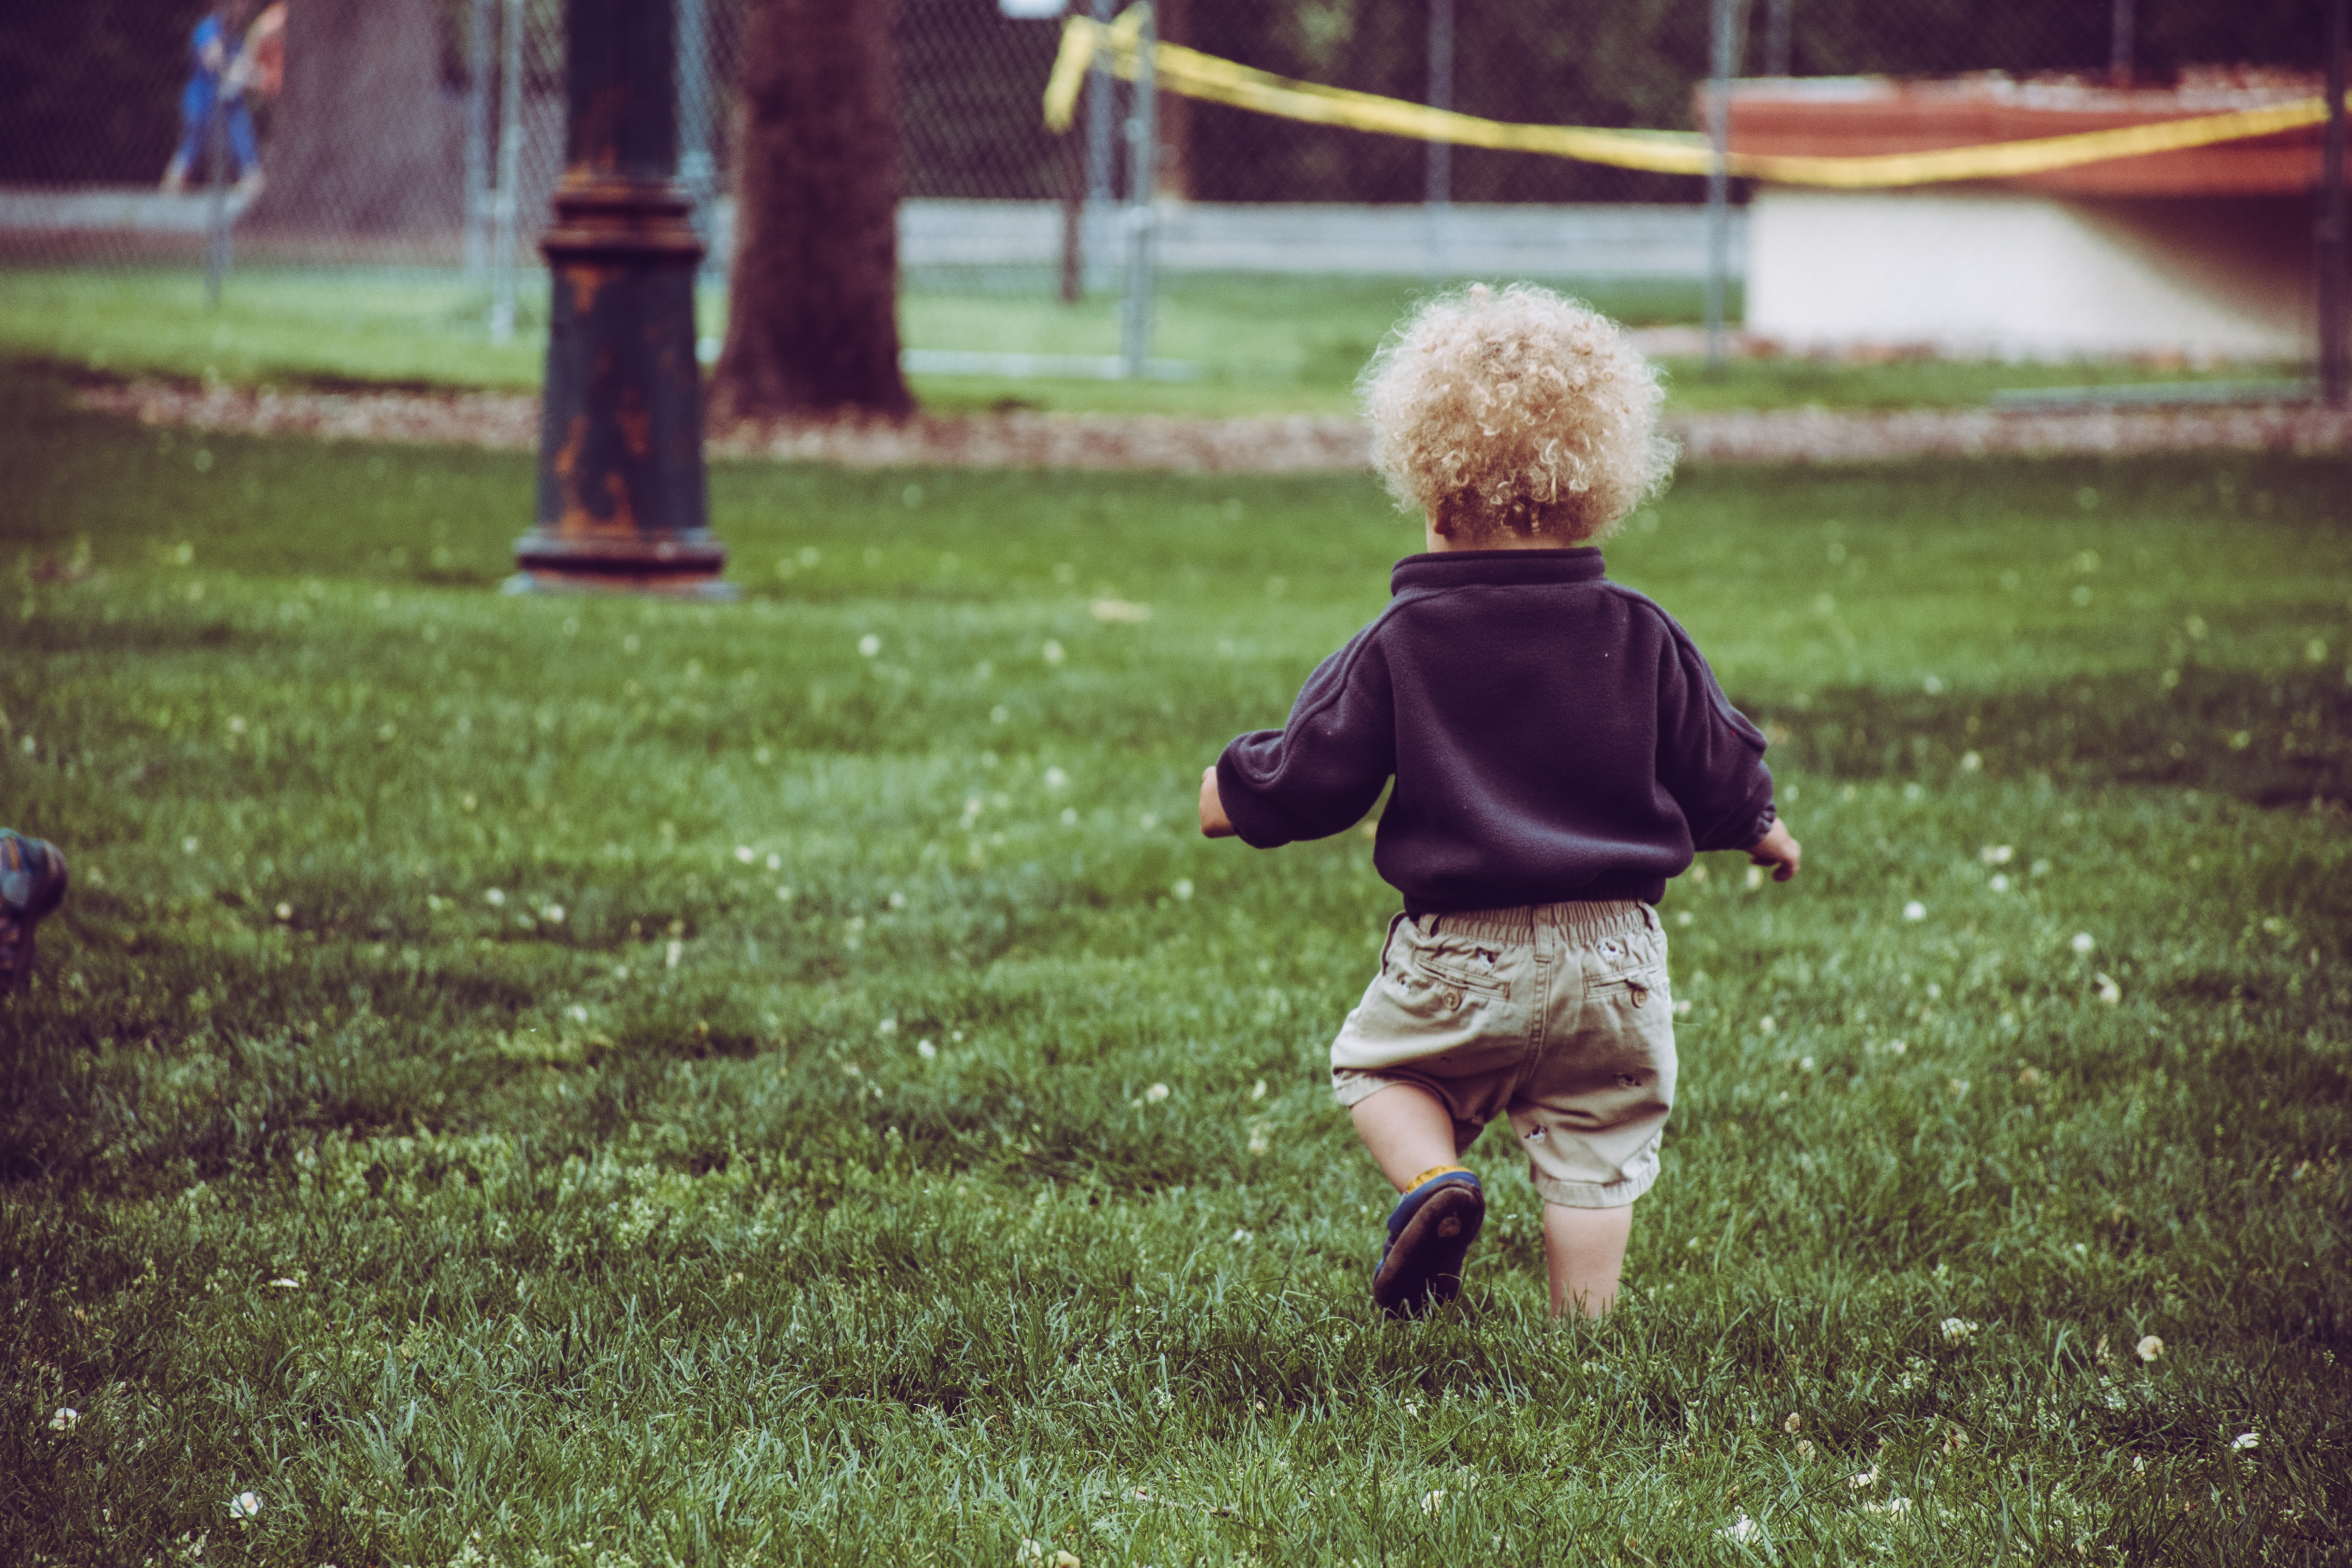 grass, miscellanea, miscellaneous, curly, stroll, kid, tot, child, childhood